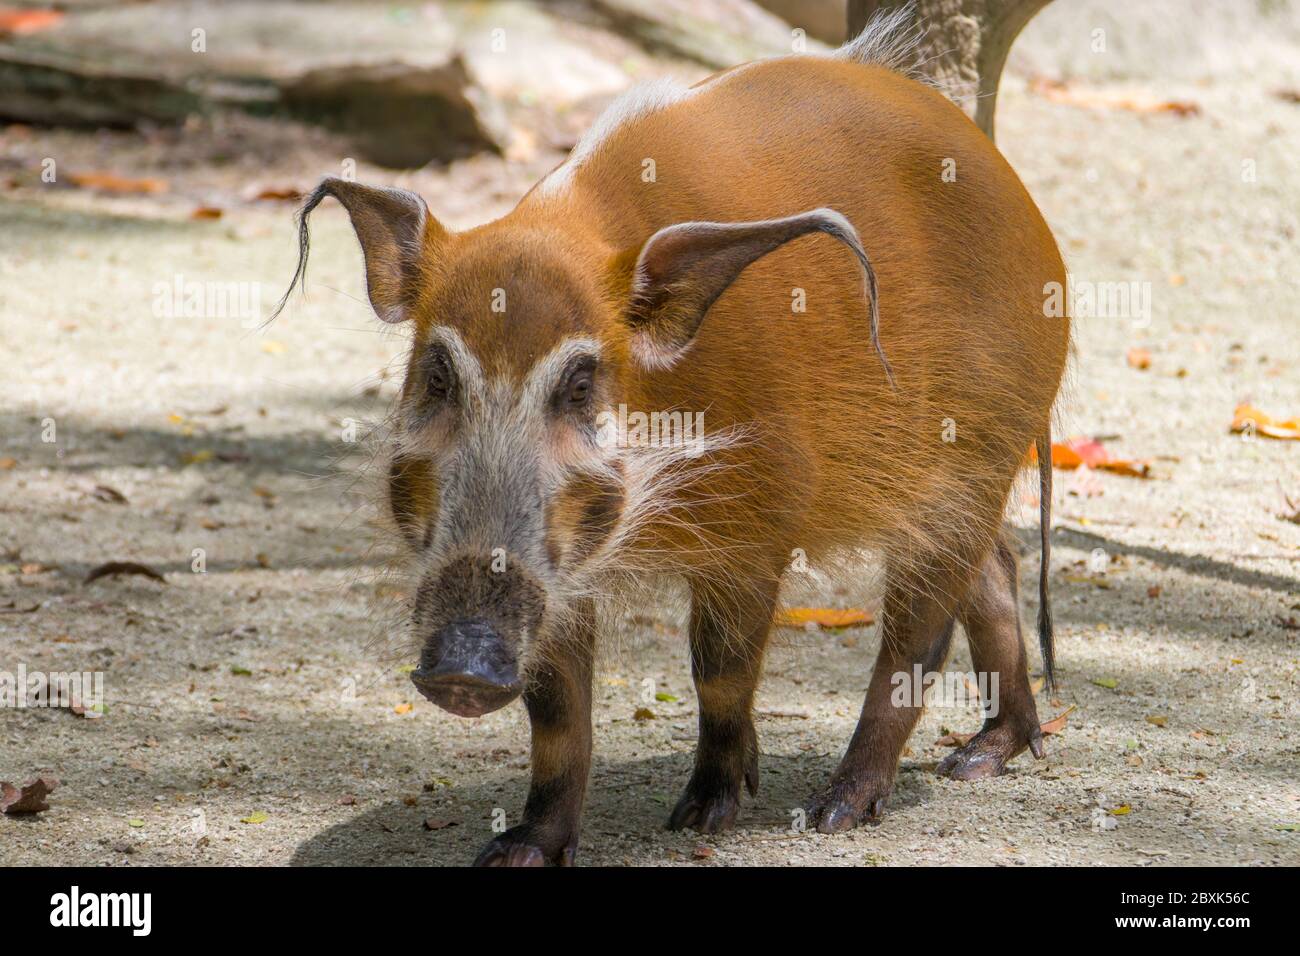 The red river hog (Potamochoerus porcus) is a wild member of the pig family living in Africa. Stock Photo